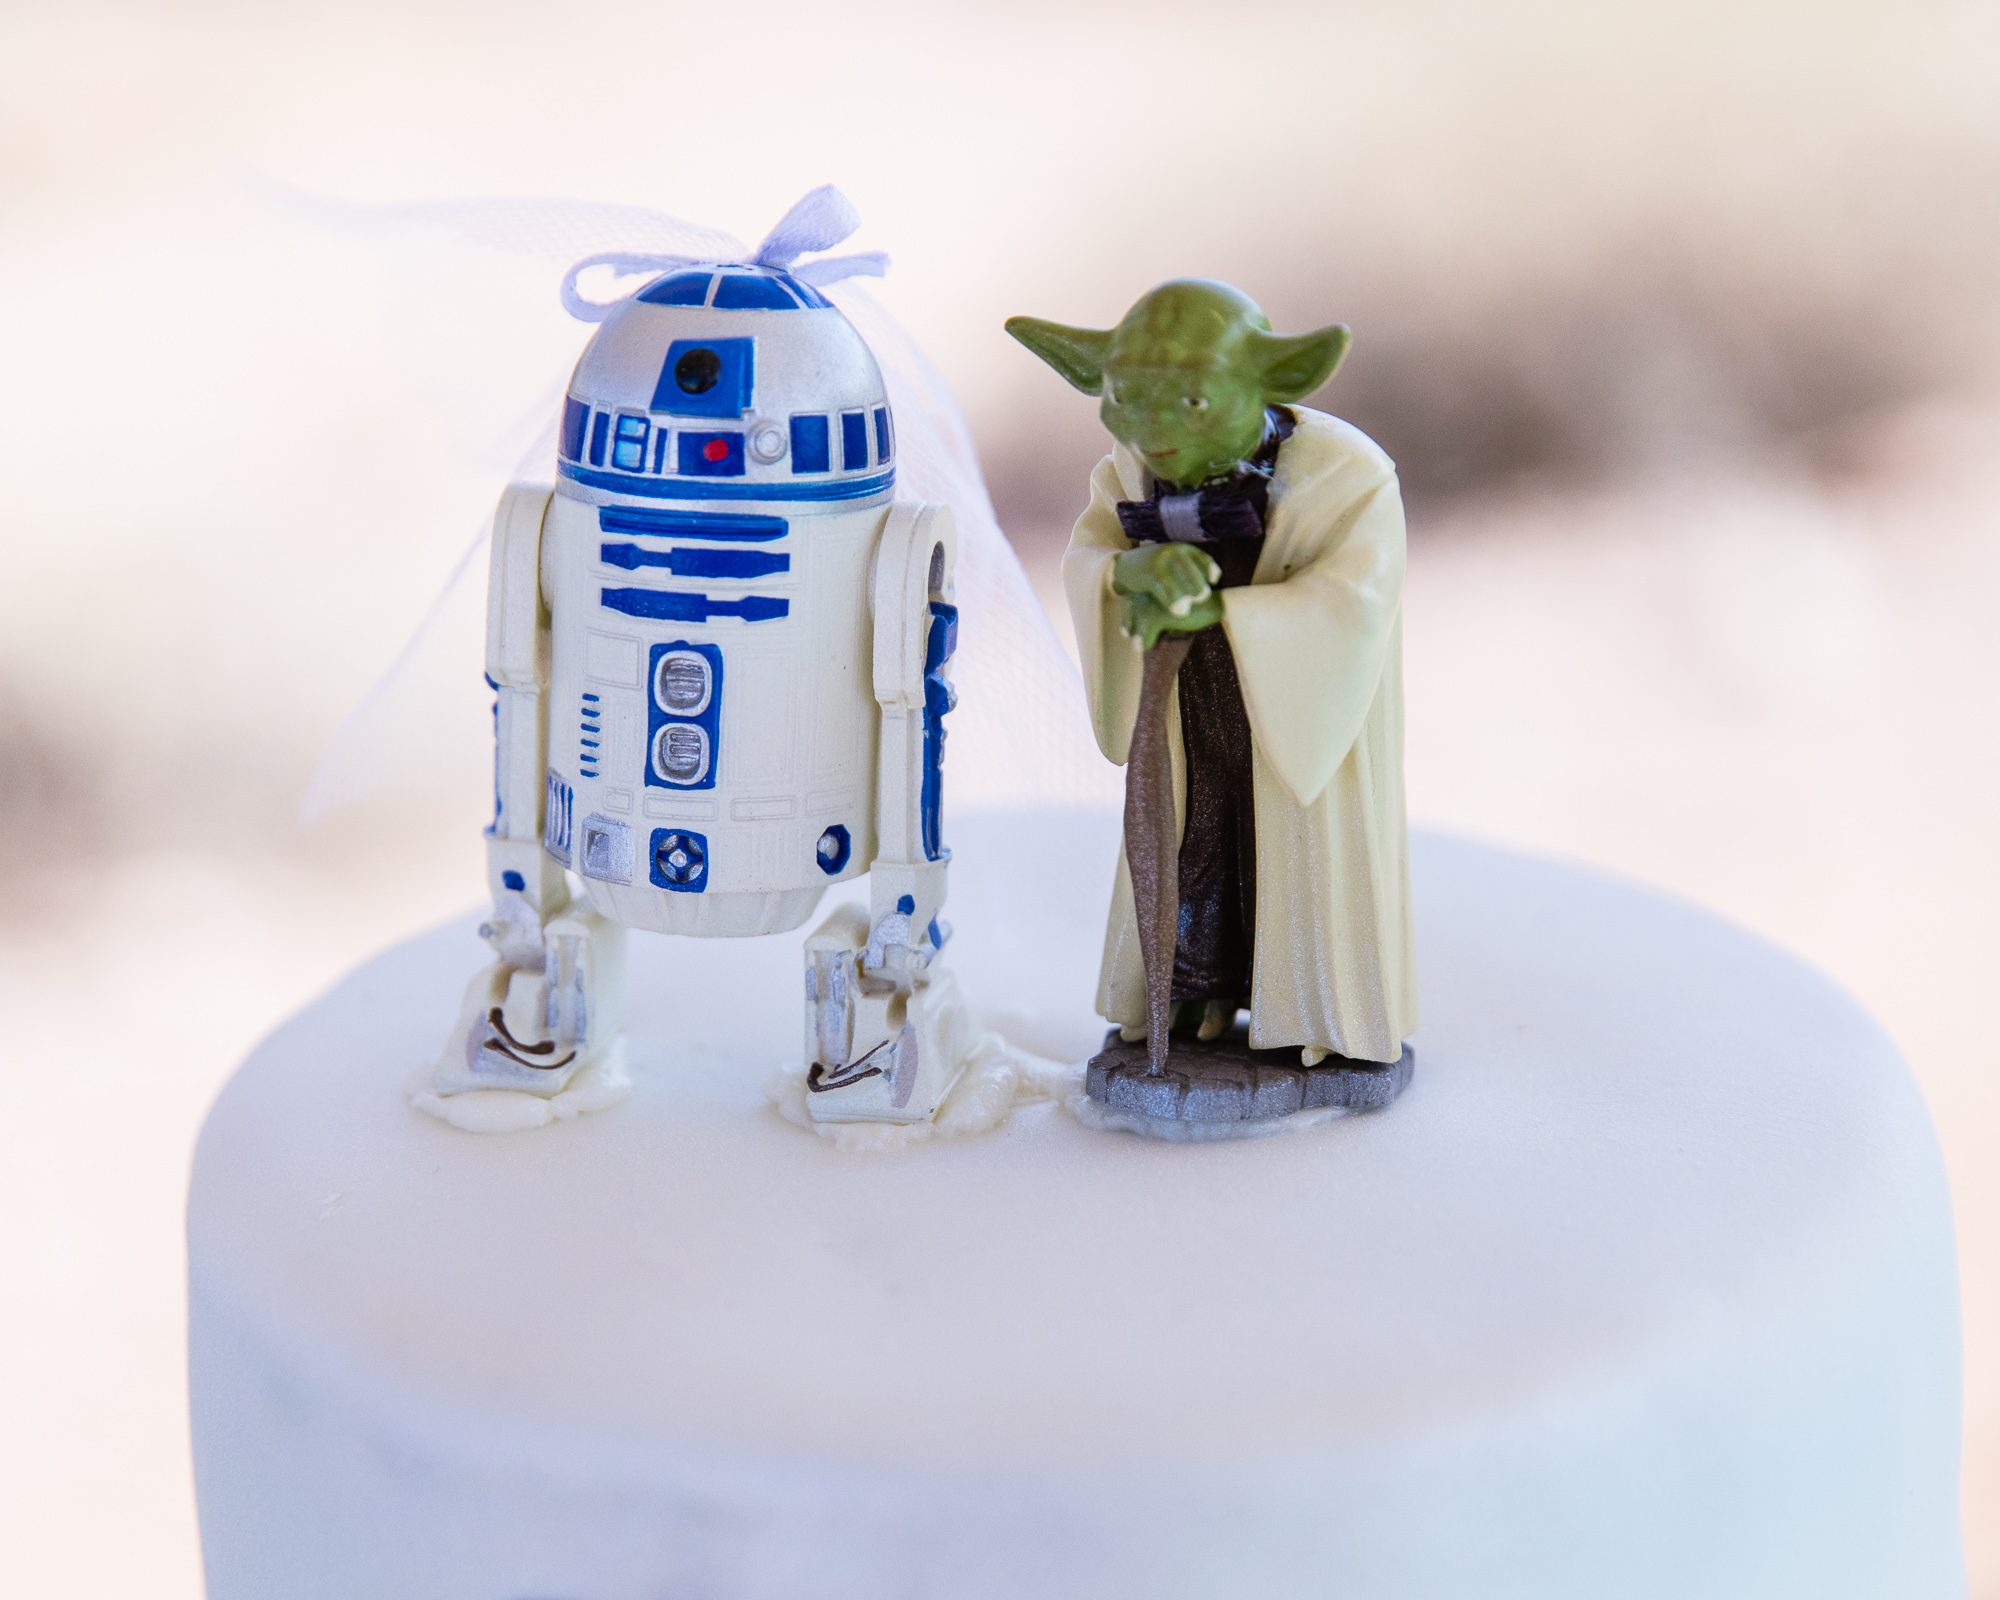 R2D2 with a veil and Yoda Star Wars wedding cake toppers by PMA Photography.